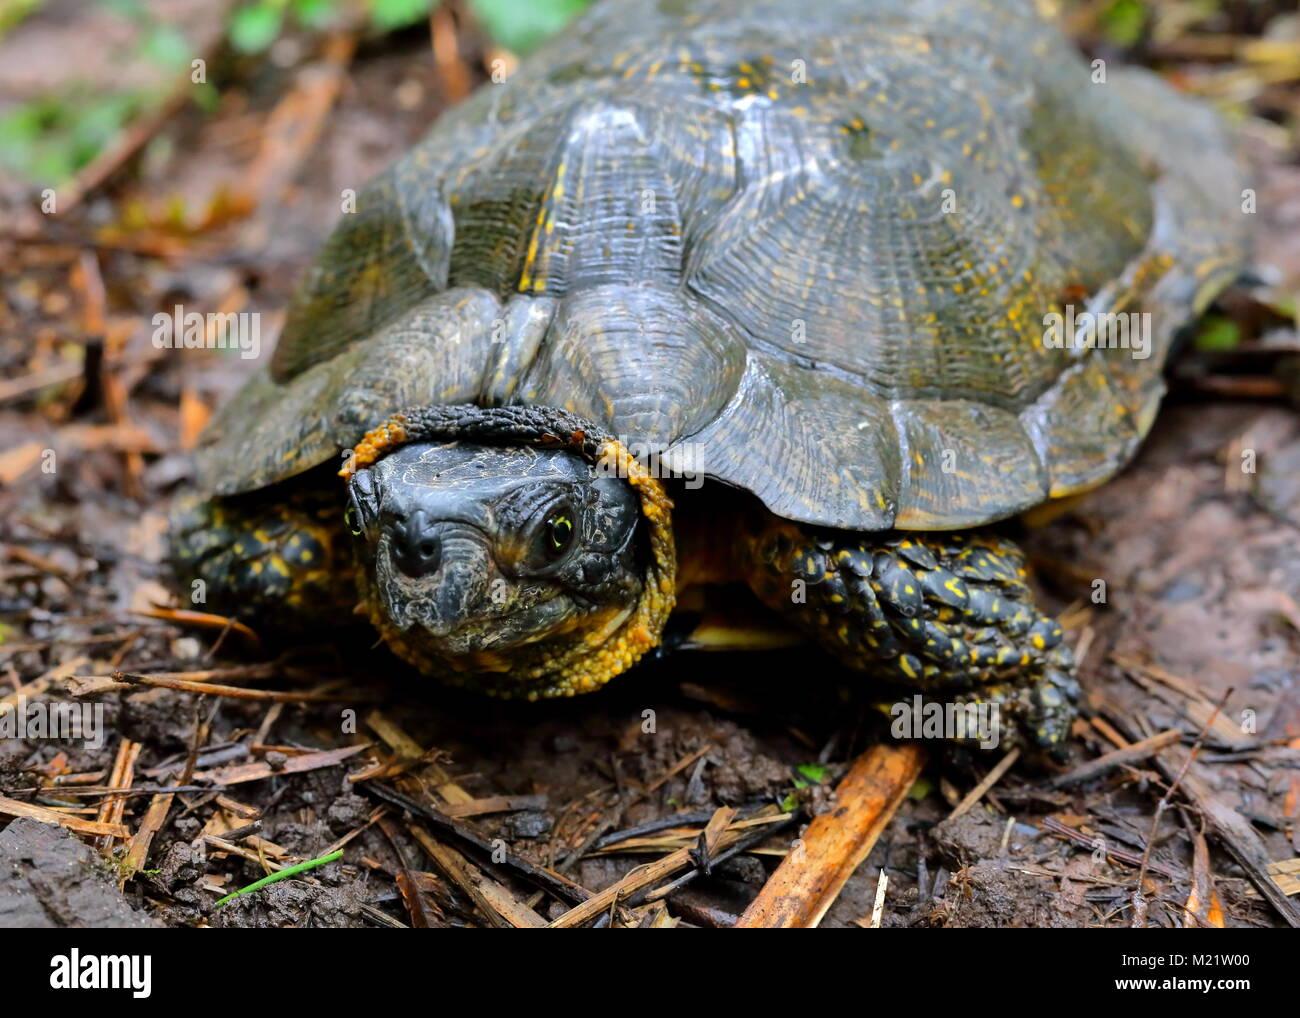 Wood turtle, Glyptemys insculpta, on the forest floor of Brule River State Forest in Wisconsin, USA. Stock Photo